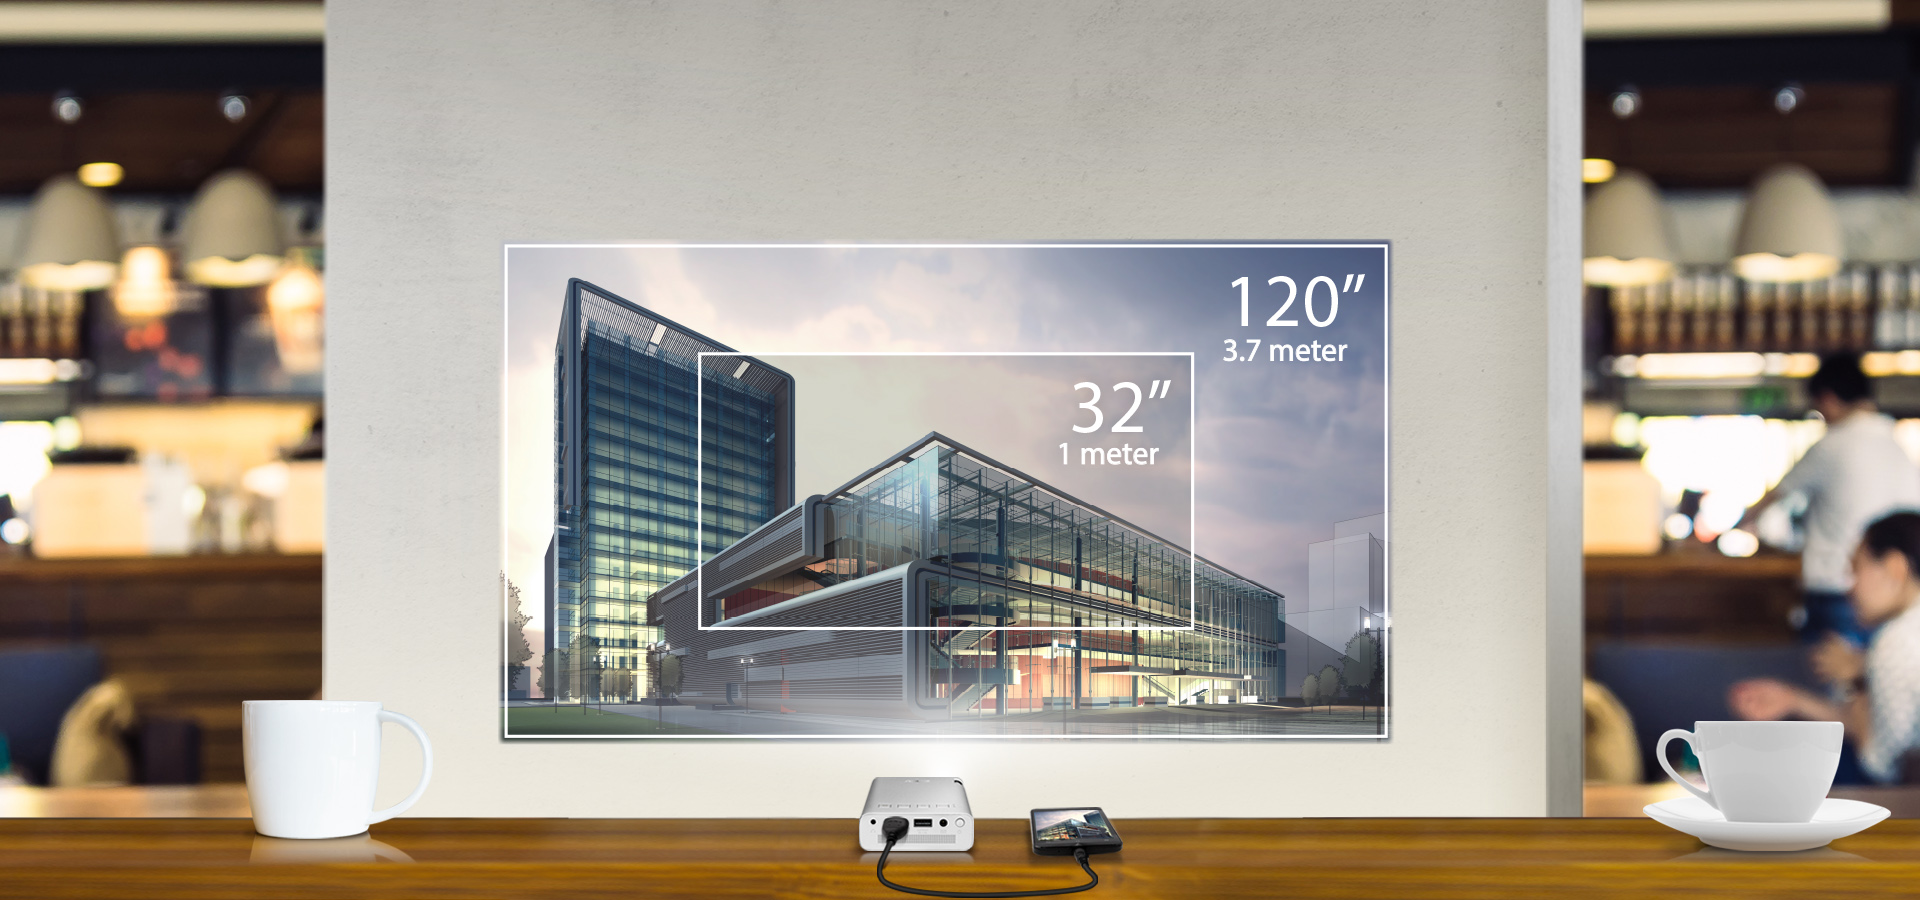 ASUS ZenBeam E1 can project 32 inch screen in 1 meter and 120 inch screen in 3.7 meter